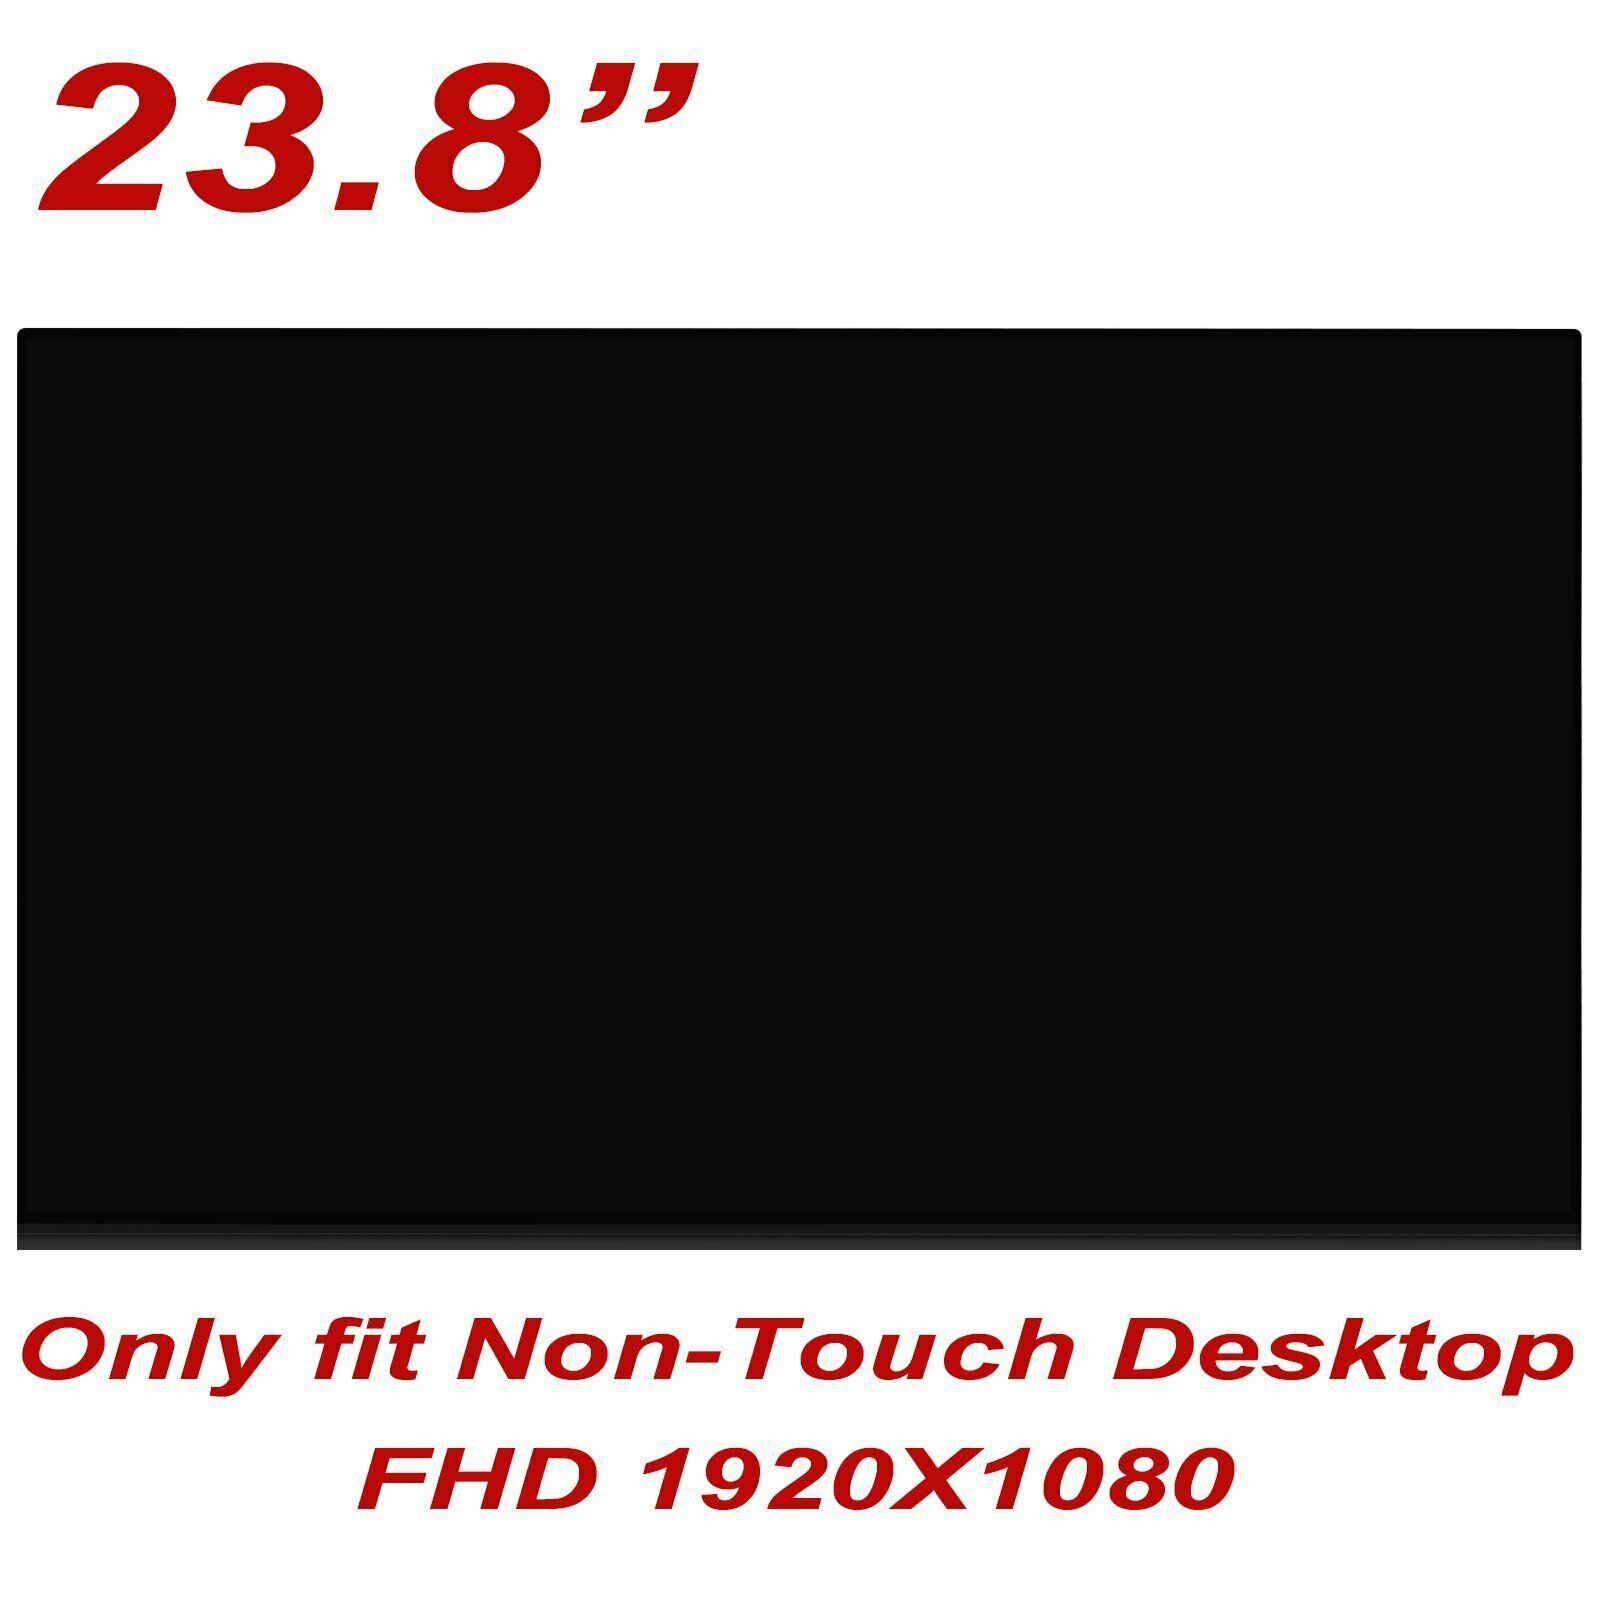 NEW Genuine Lenovo ThinkCentre M920z All-in-One 23.8